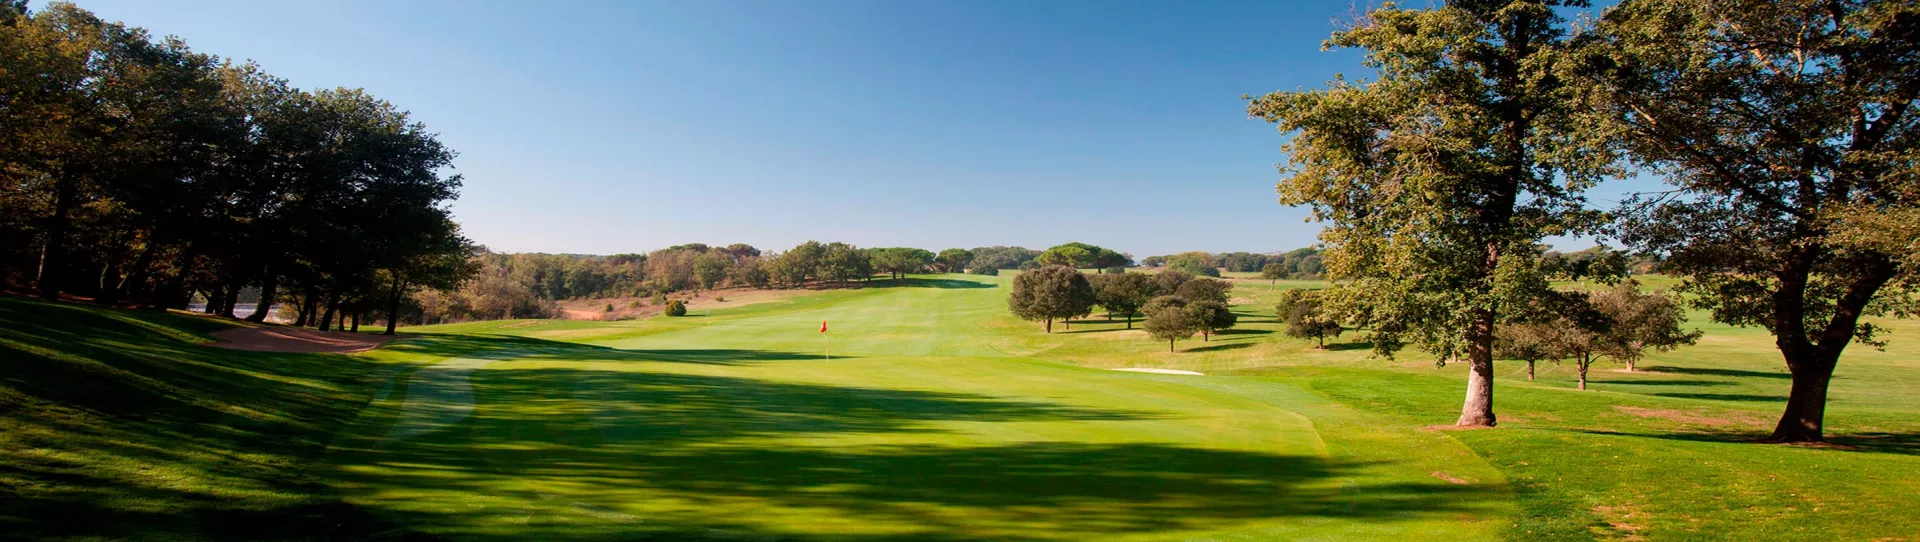 Spain golf courses - Montanya Golf Course - Photo 1